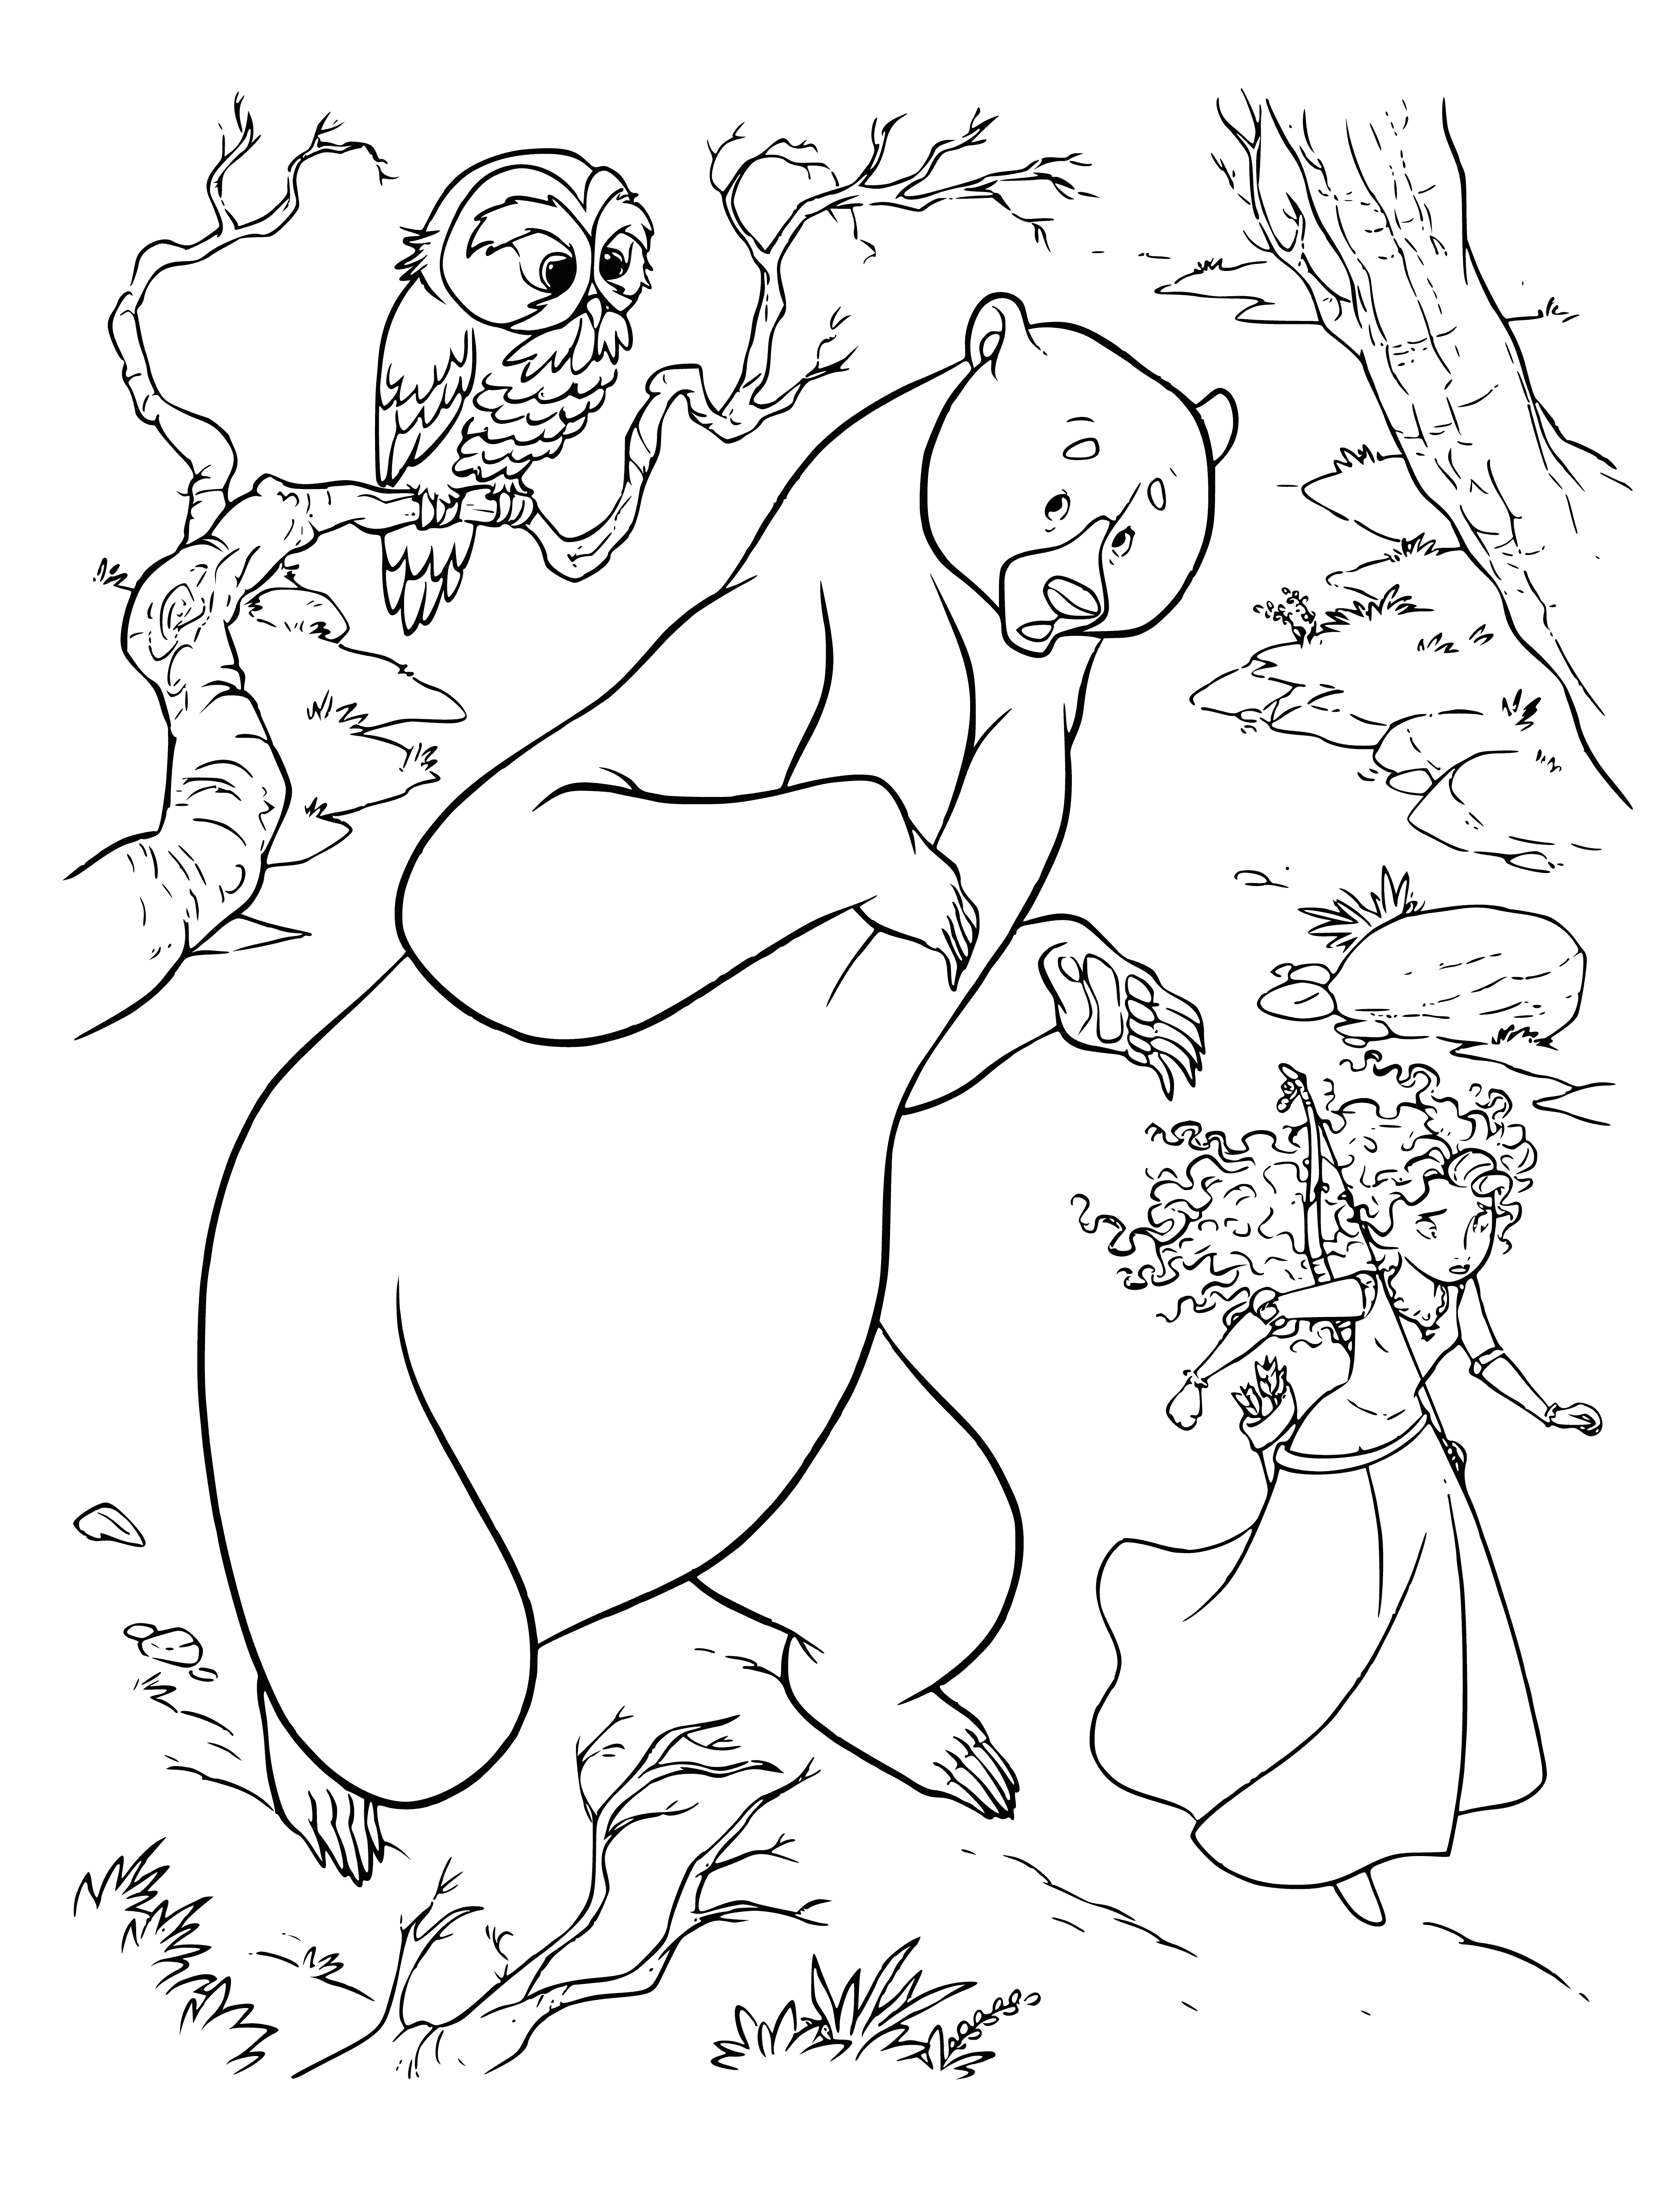 coloring page: Girl w/ curly red hair in green dress speaks to standing brown bear in forest; they appear to be talking.